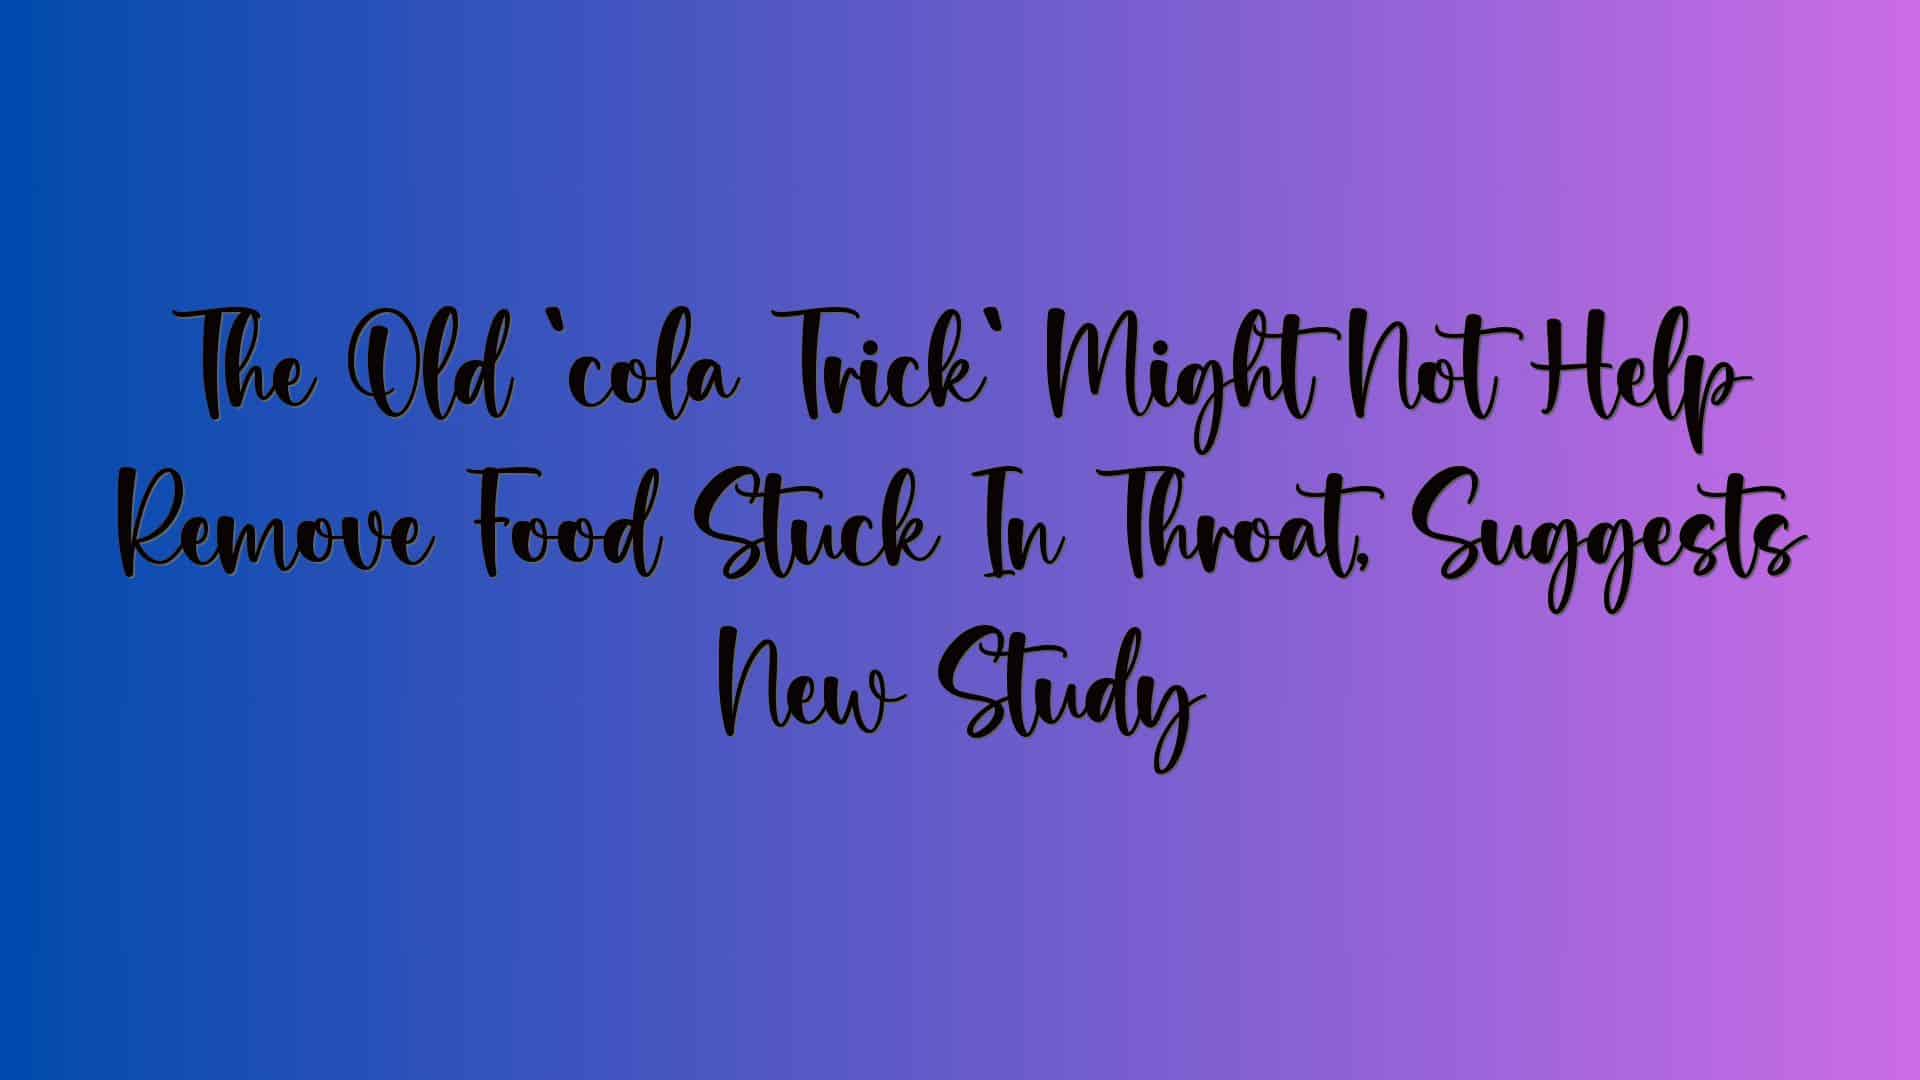 The Old `cola Trick` Might Not Help Remove Food Stuck In Throat, Suggests New Study